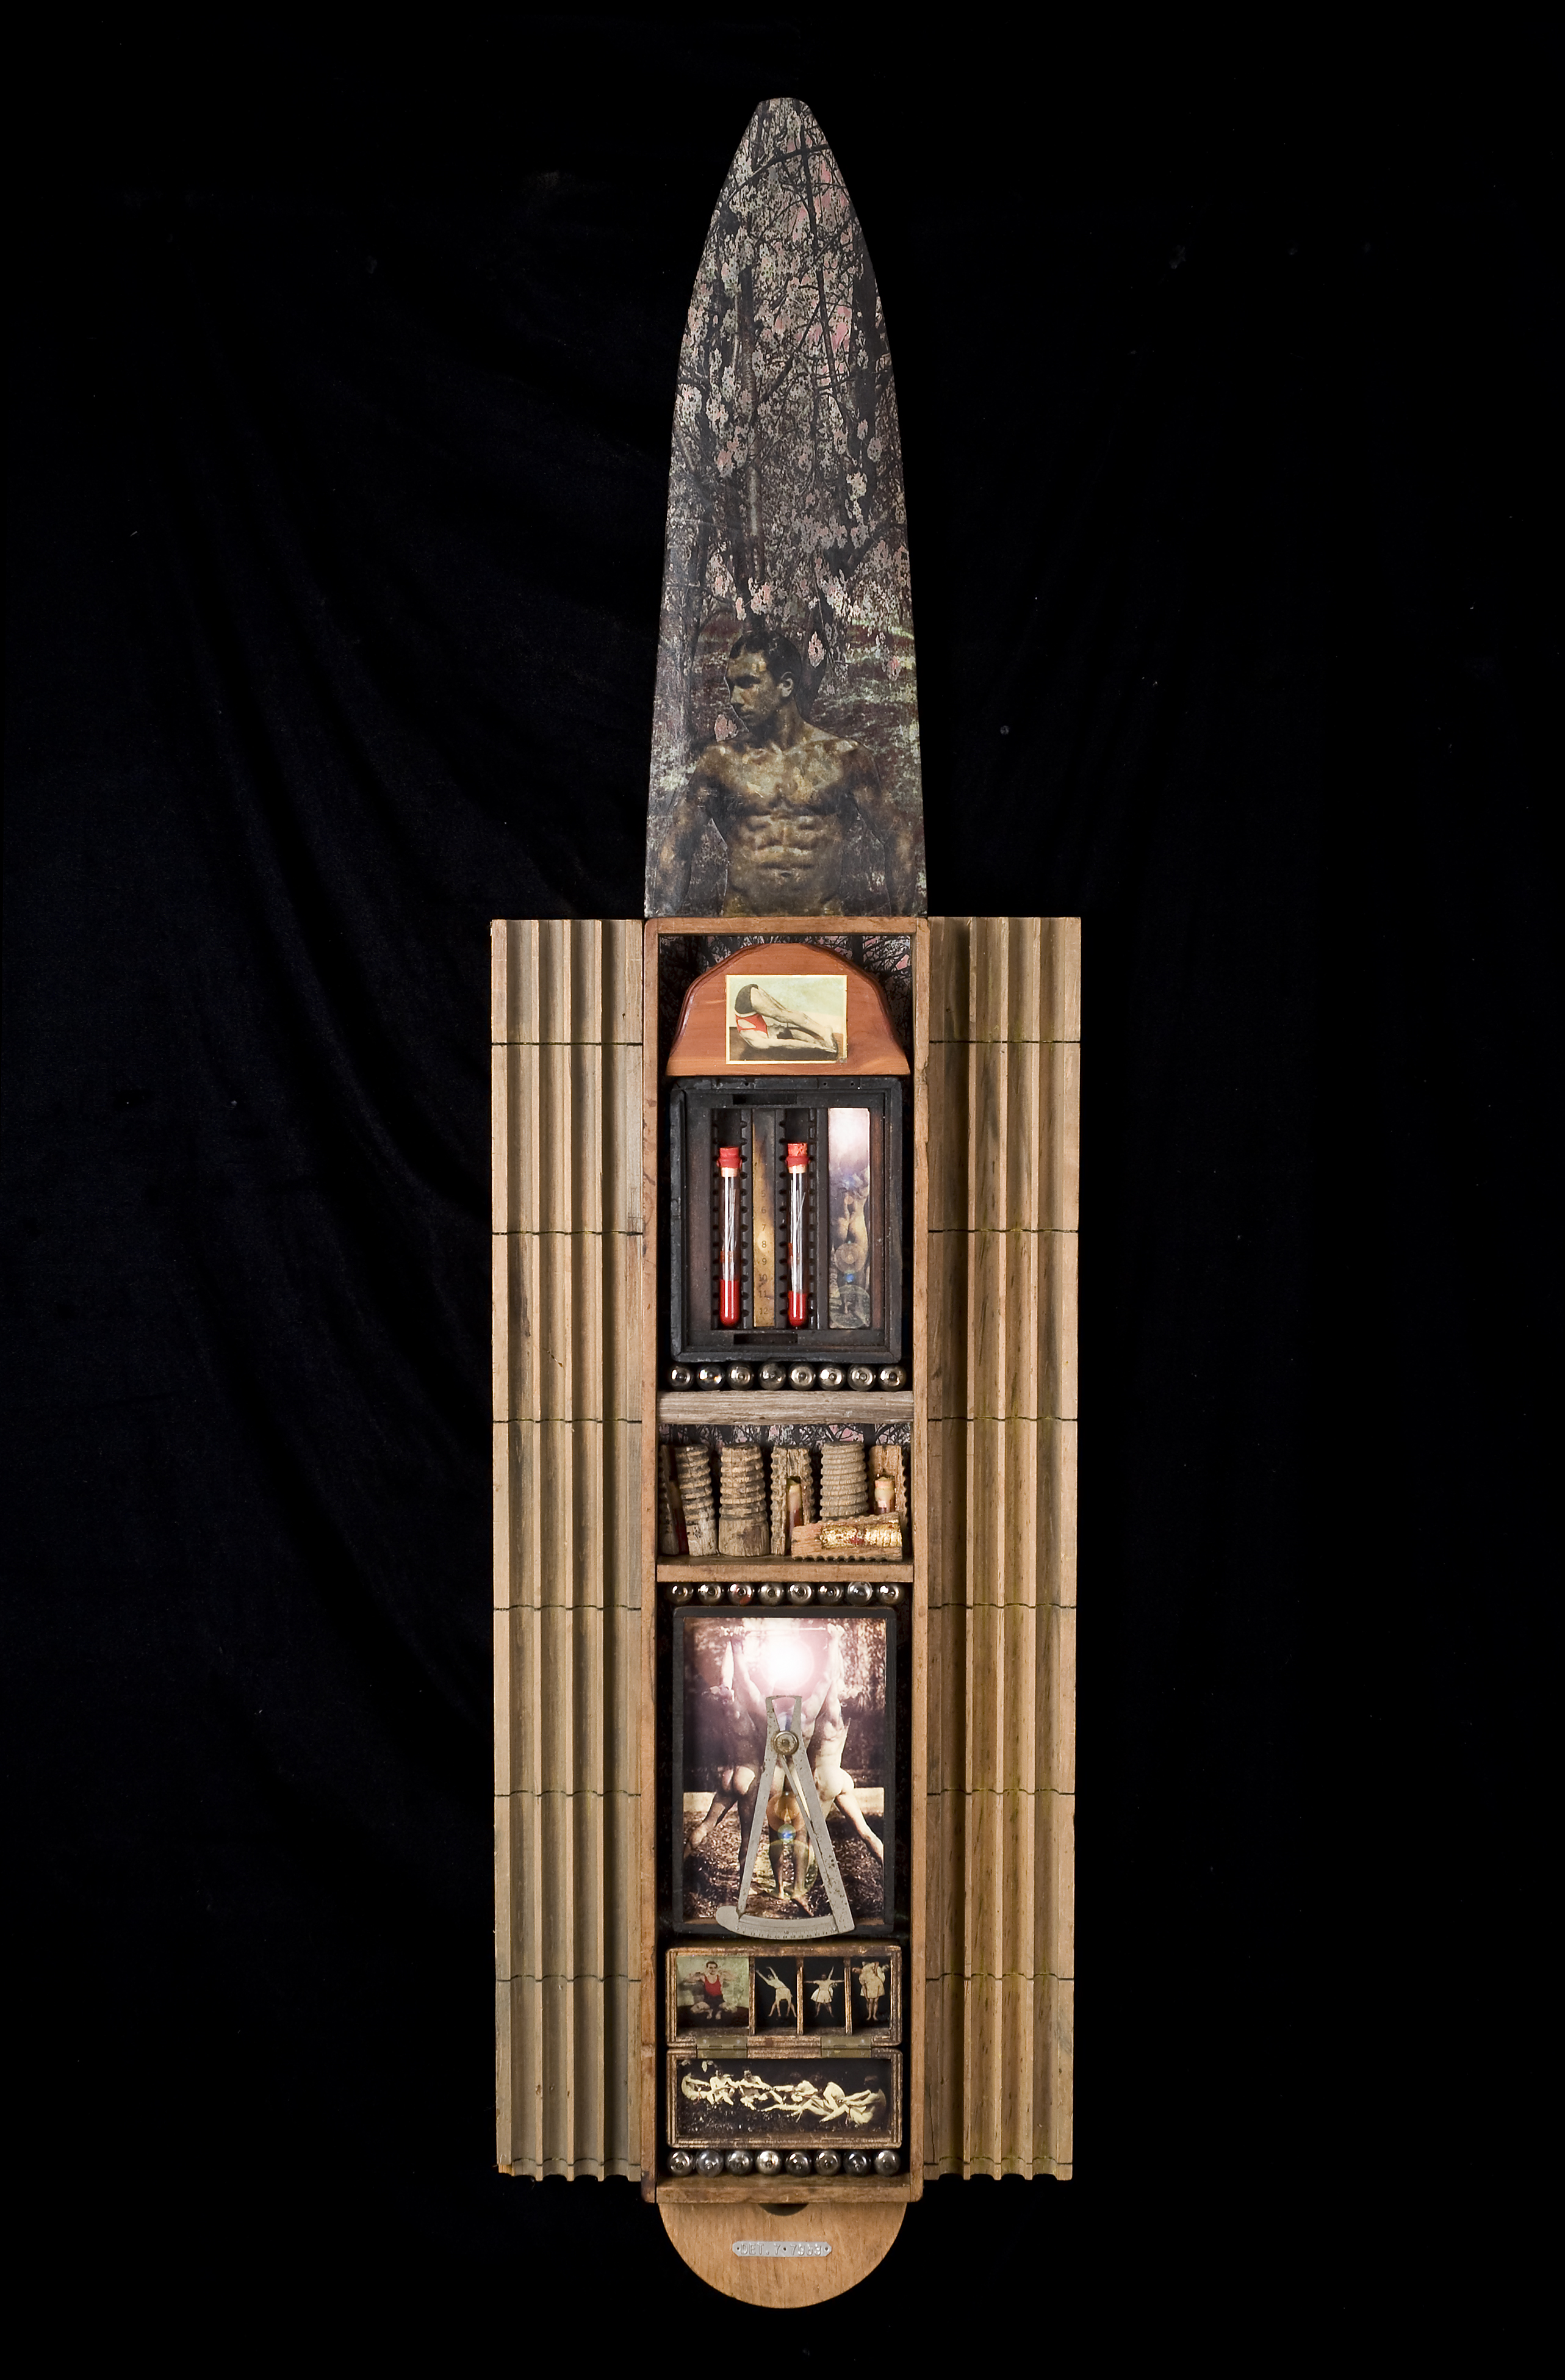     \"The Body Electric\"
    mixed-media assemblage
    53\"h x 14\"w x 2.5\"d
    2009

    $850.00

    Mixed-media assemblage with found wood boxes, wood crayon molds, wood pelt stretcher, foundry pattern, electronic glass tubes, digitals scans on paper from my collection of old photos, wax, wood telephone pole toppers, test tubes, small glass cordial, metal optometrist\'s measure, tobac card, gold leaf